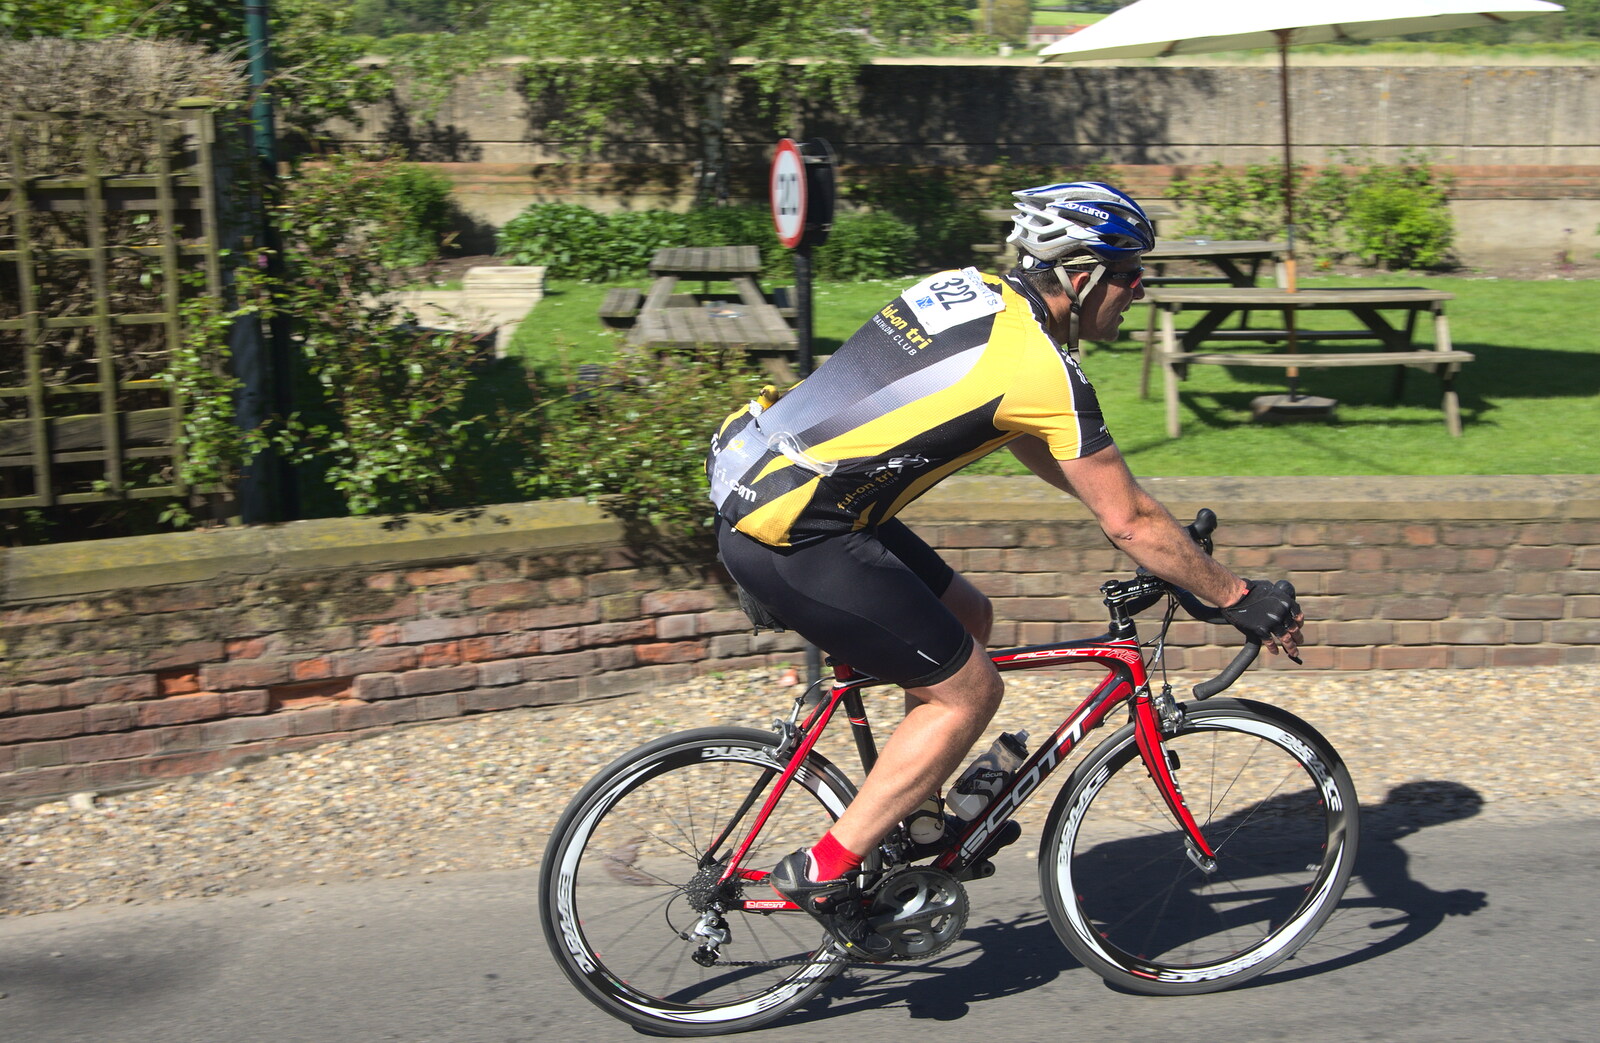 One of a thousand cyclists from The BSCC at Needham, and a Birthday By The Sea, Cley, Norfolk - 26th May 2012